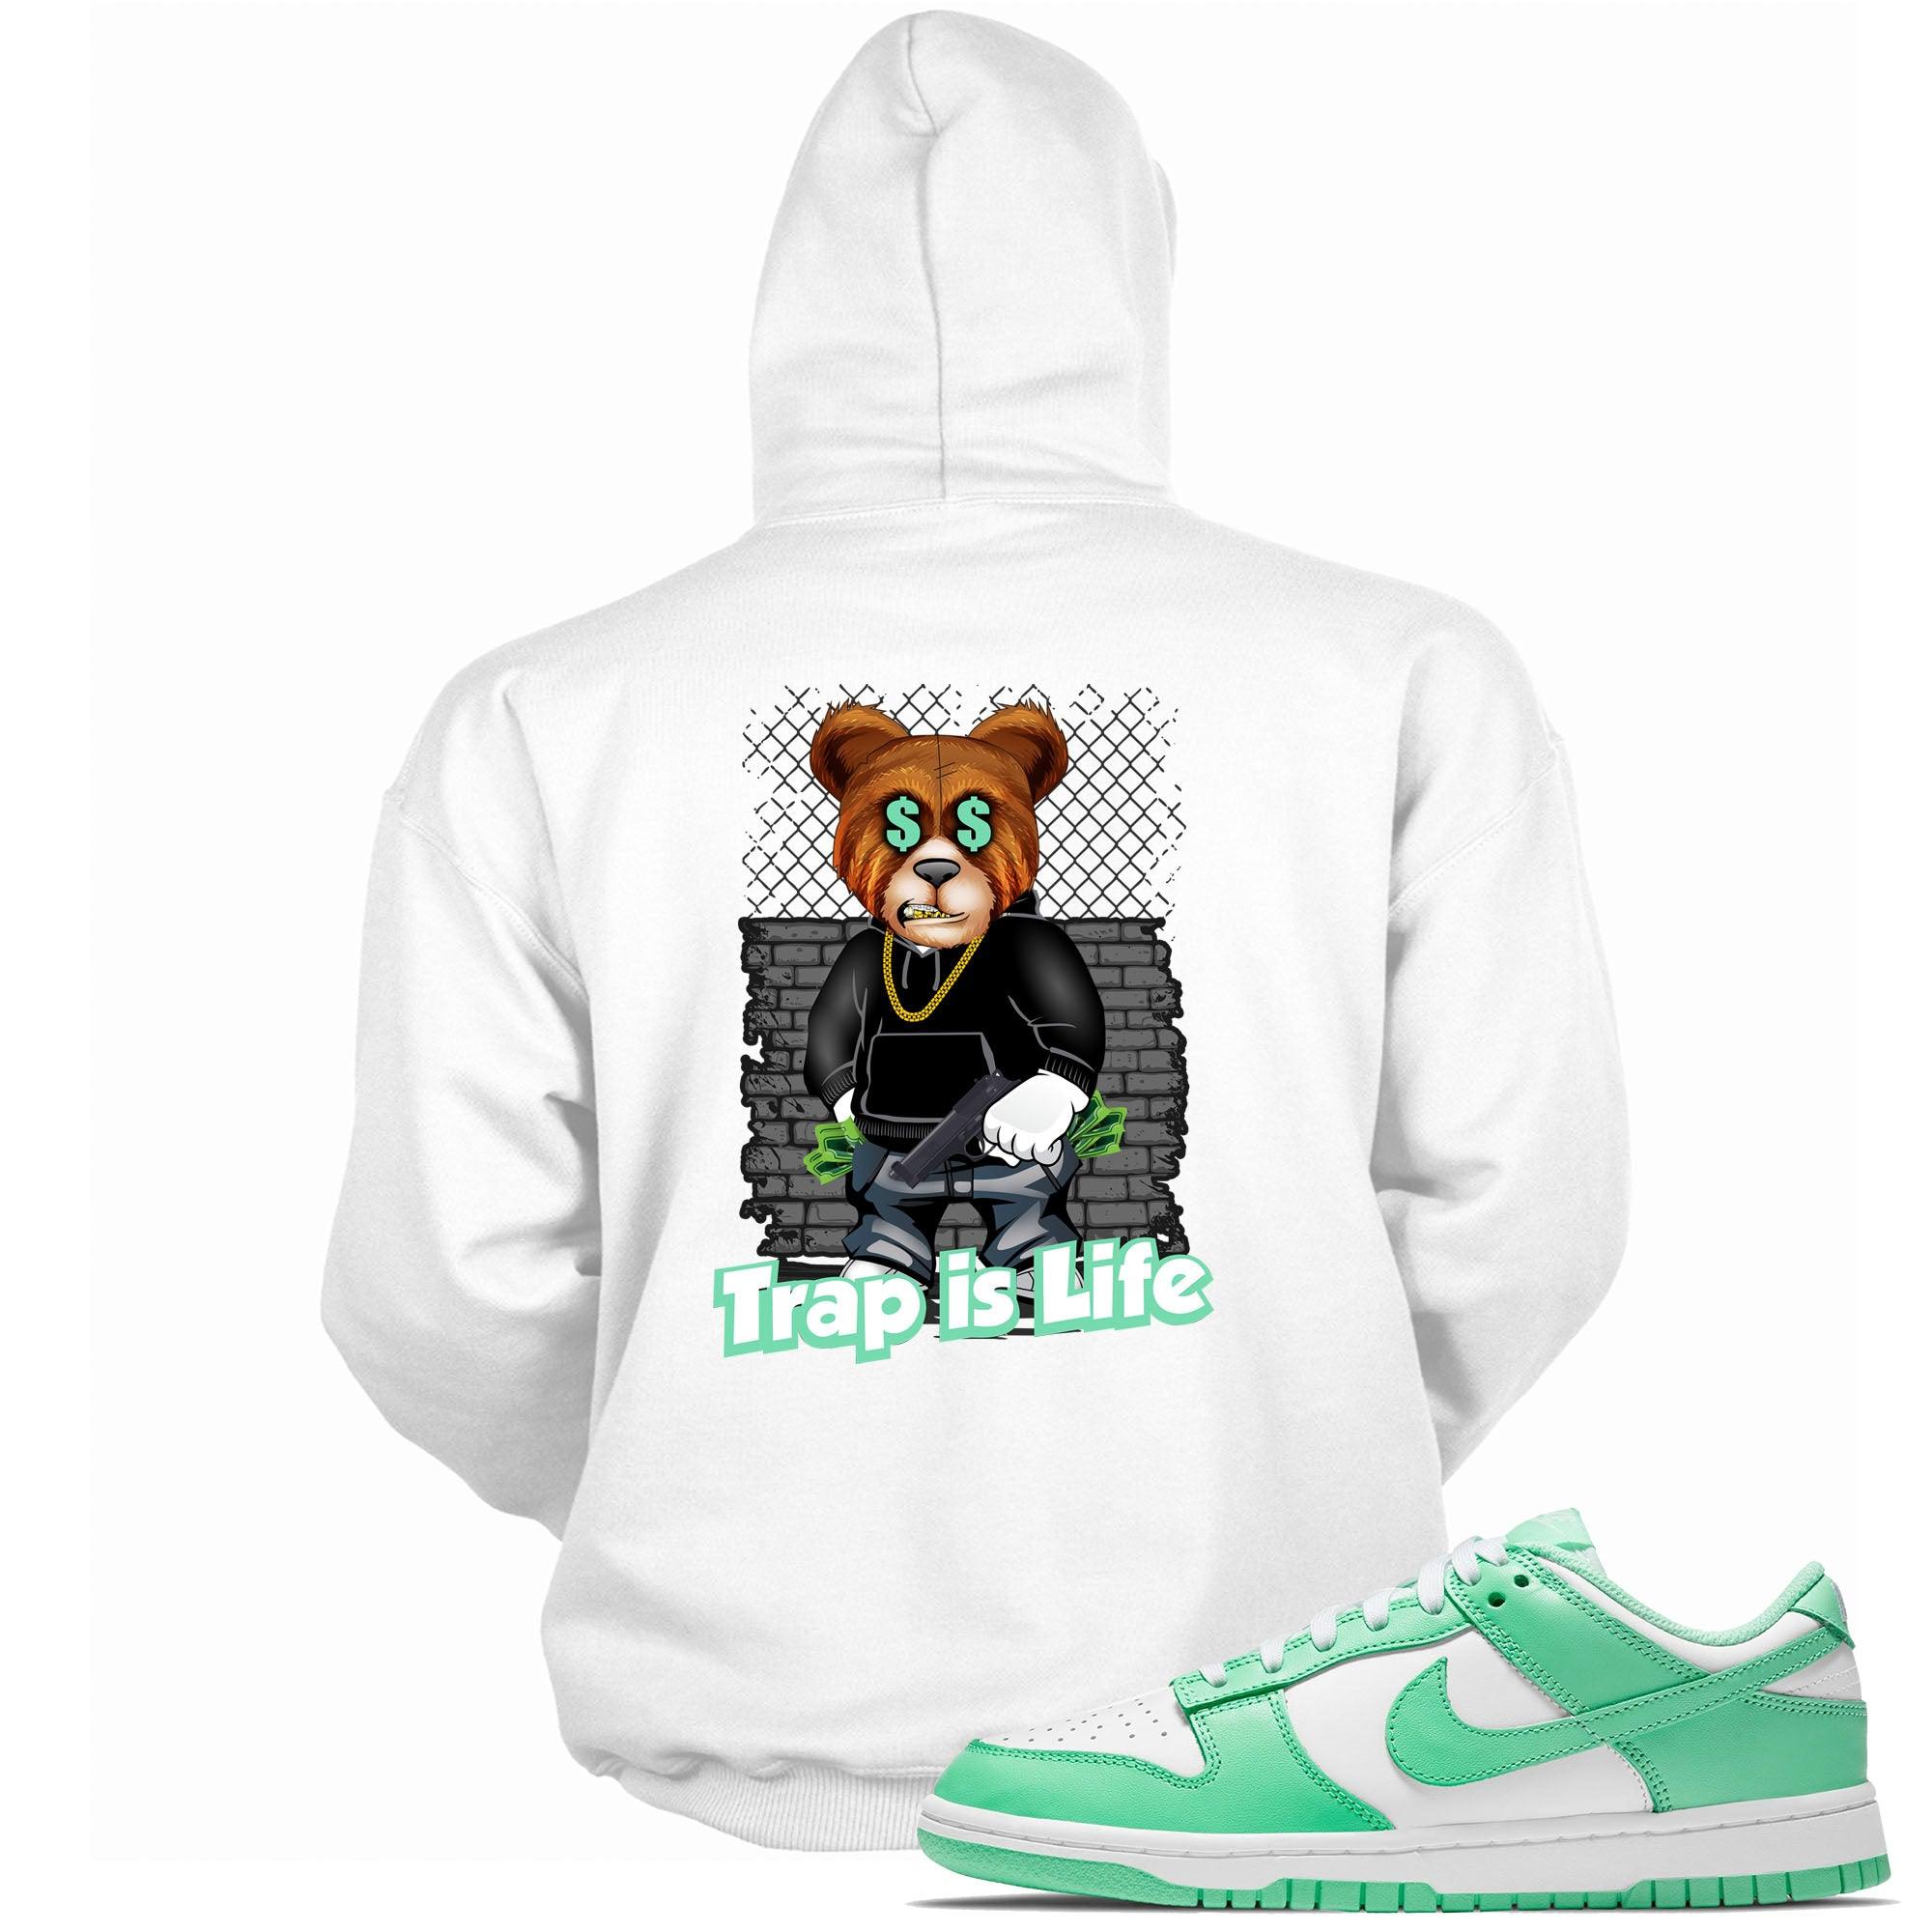 White Trap Is Life Hoodie Nike Dunks Low Green Glow photo